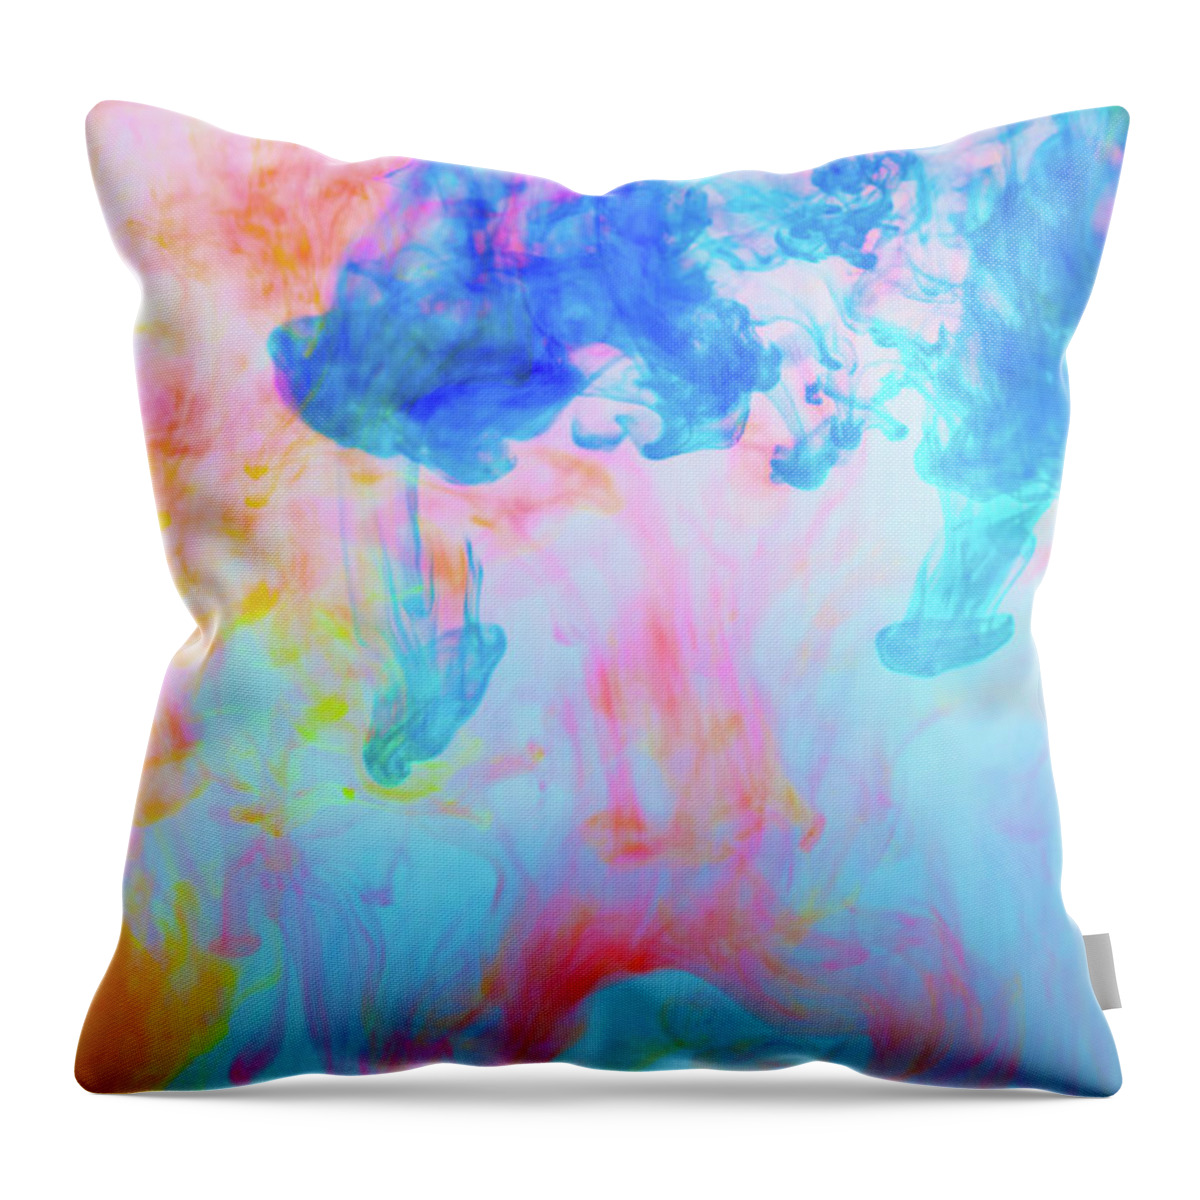 Art Throw Pillow featuring the photograph Colorful Dyes In Water by Diane Macdonald